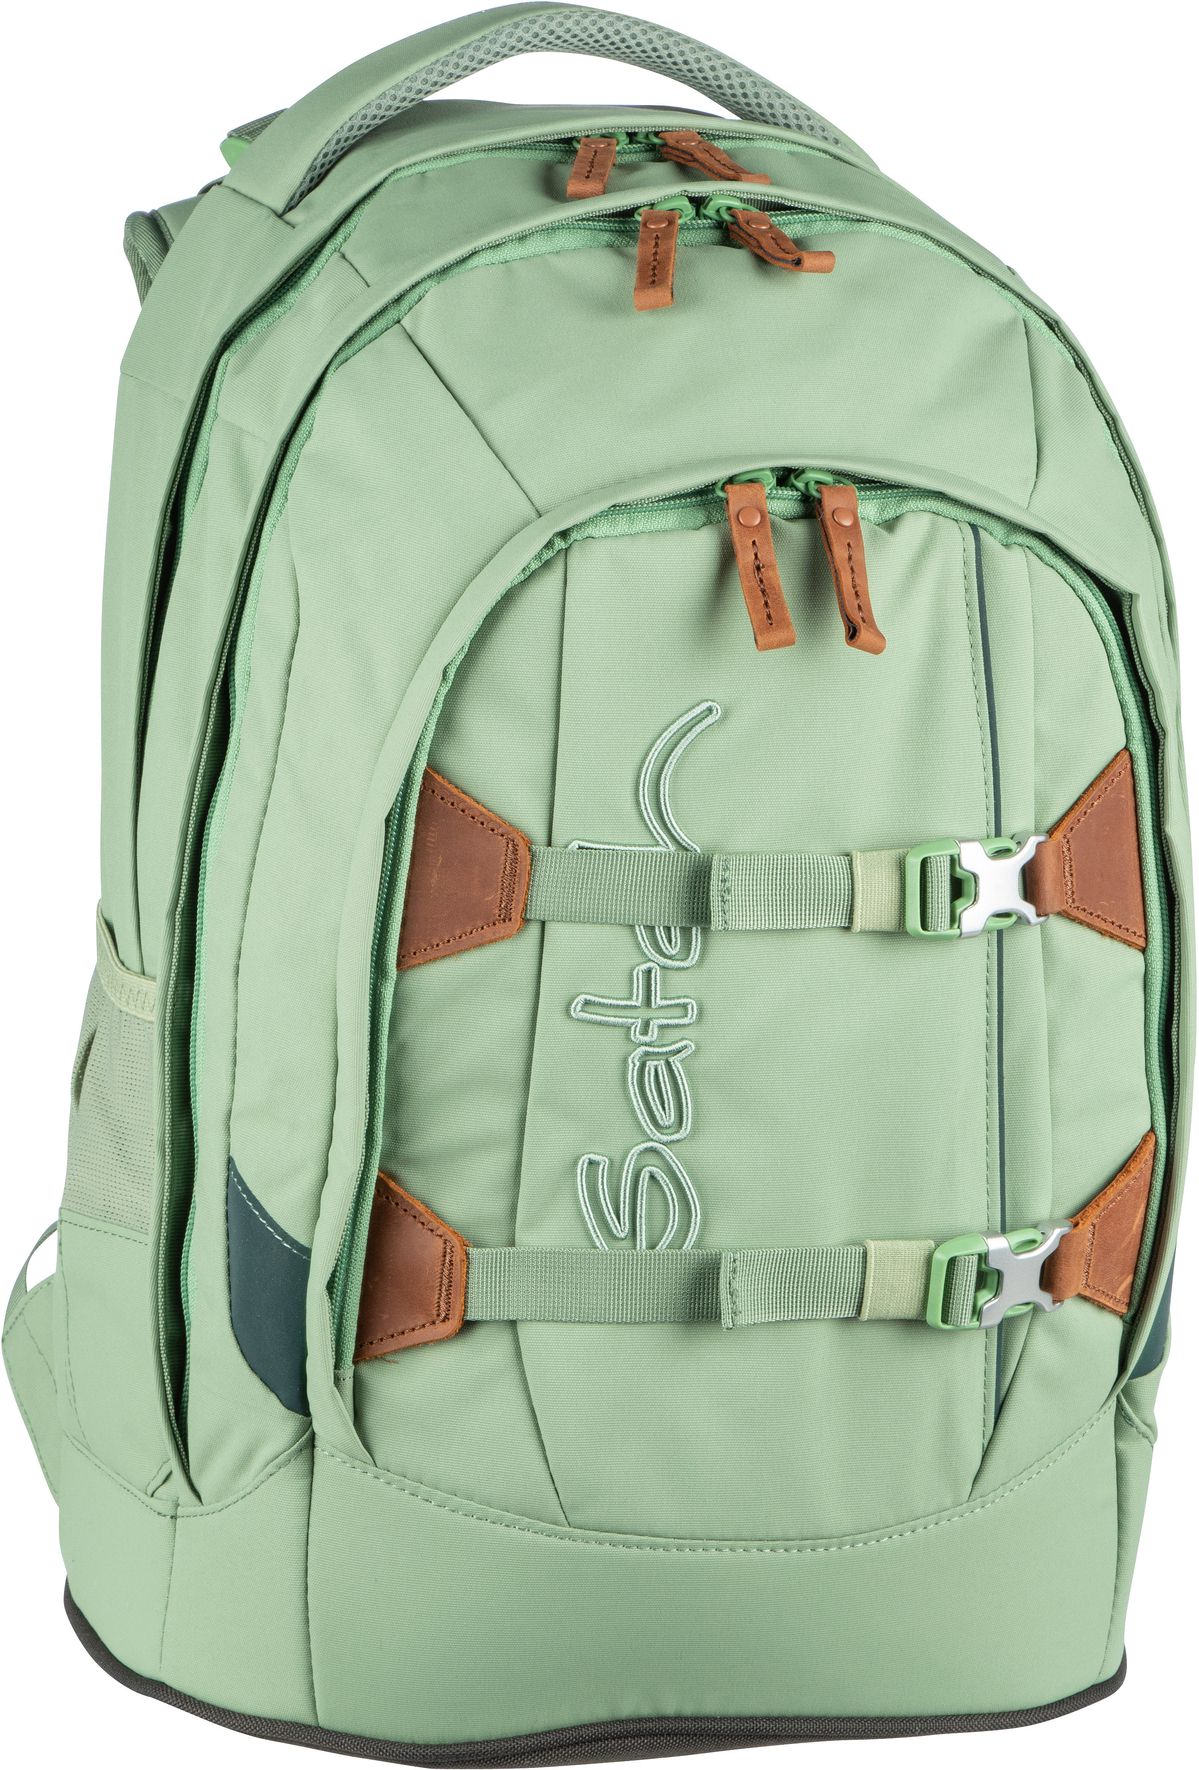 satch satch pack Nordic Edition - Nordic Jade Green